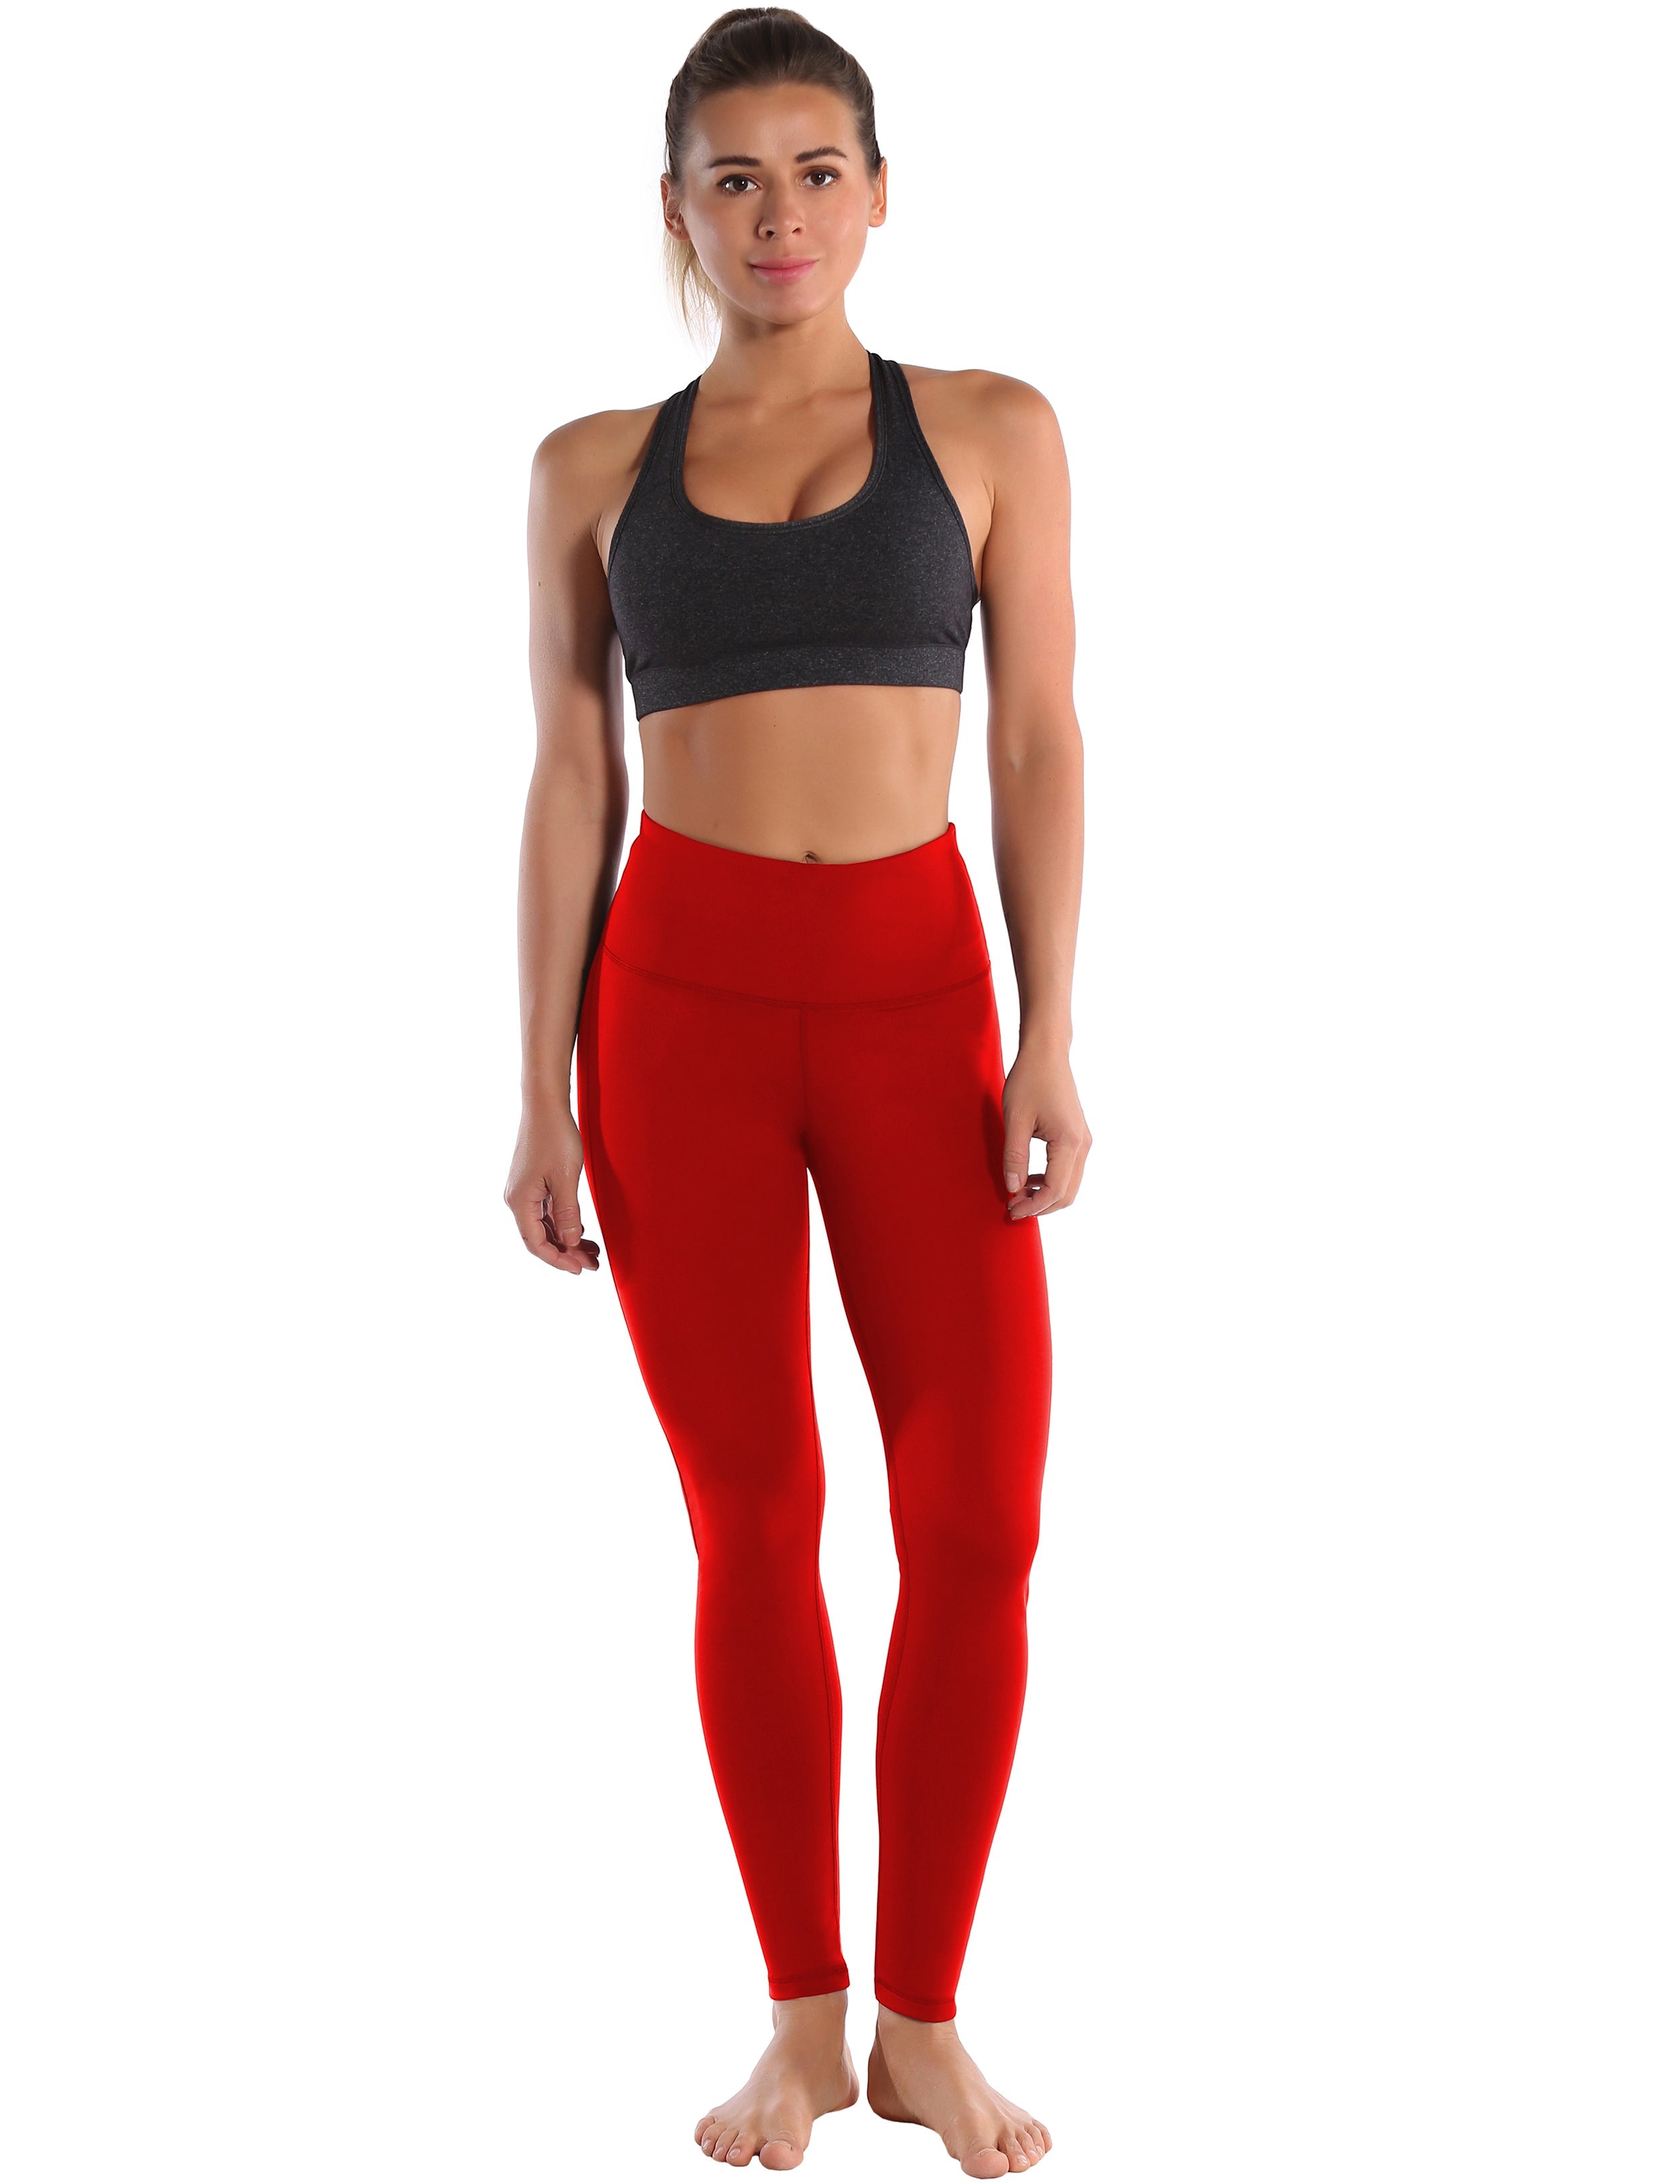 High Waist Side Line Biking Pants scarlet Side Line is Make Your Legs Look Longer and Thinner 75%Nylon/25%Spandex Fabric doesn't attract lint easily 4-way stretch No see-through Moisture-wicking Tummy control Inner pocket Two lengths